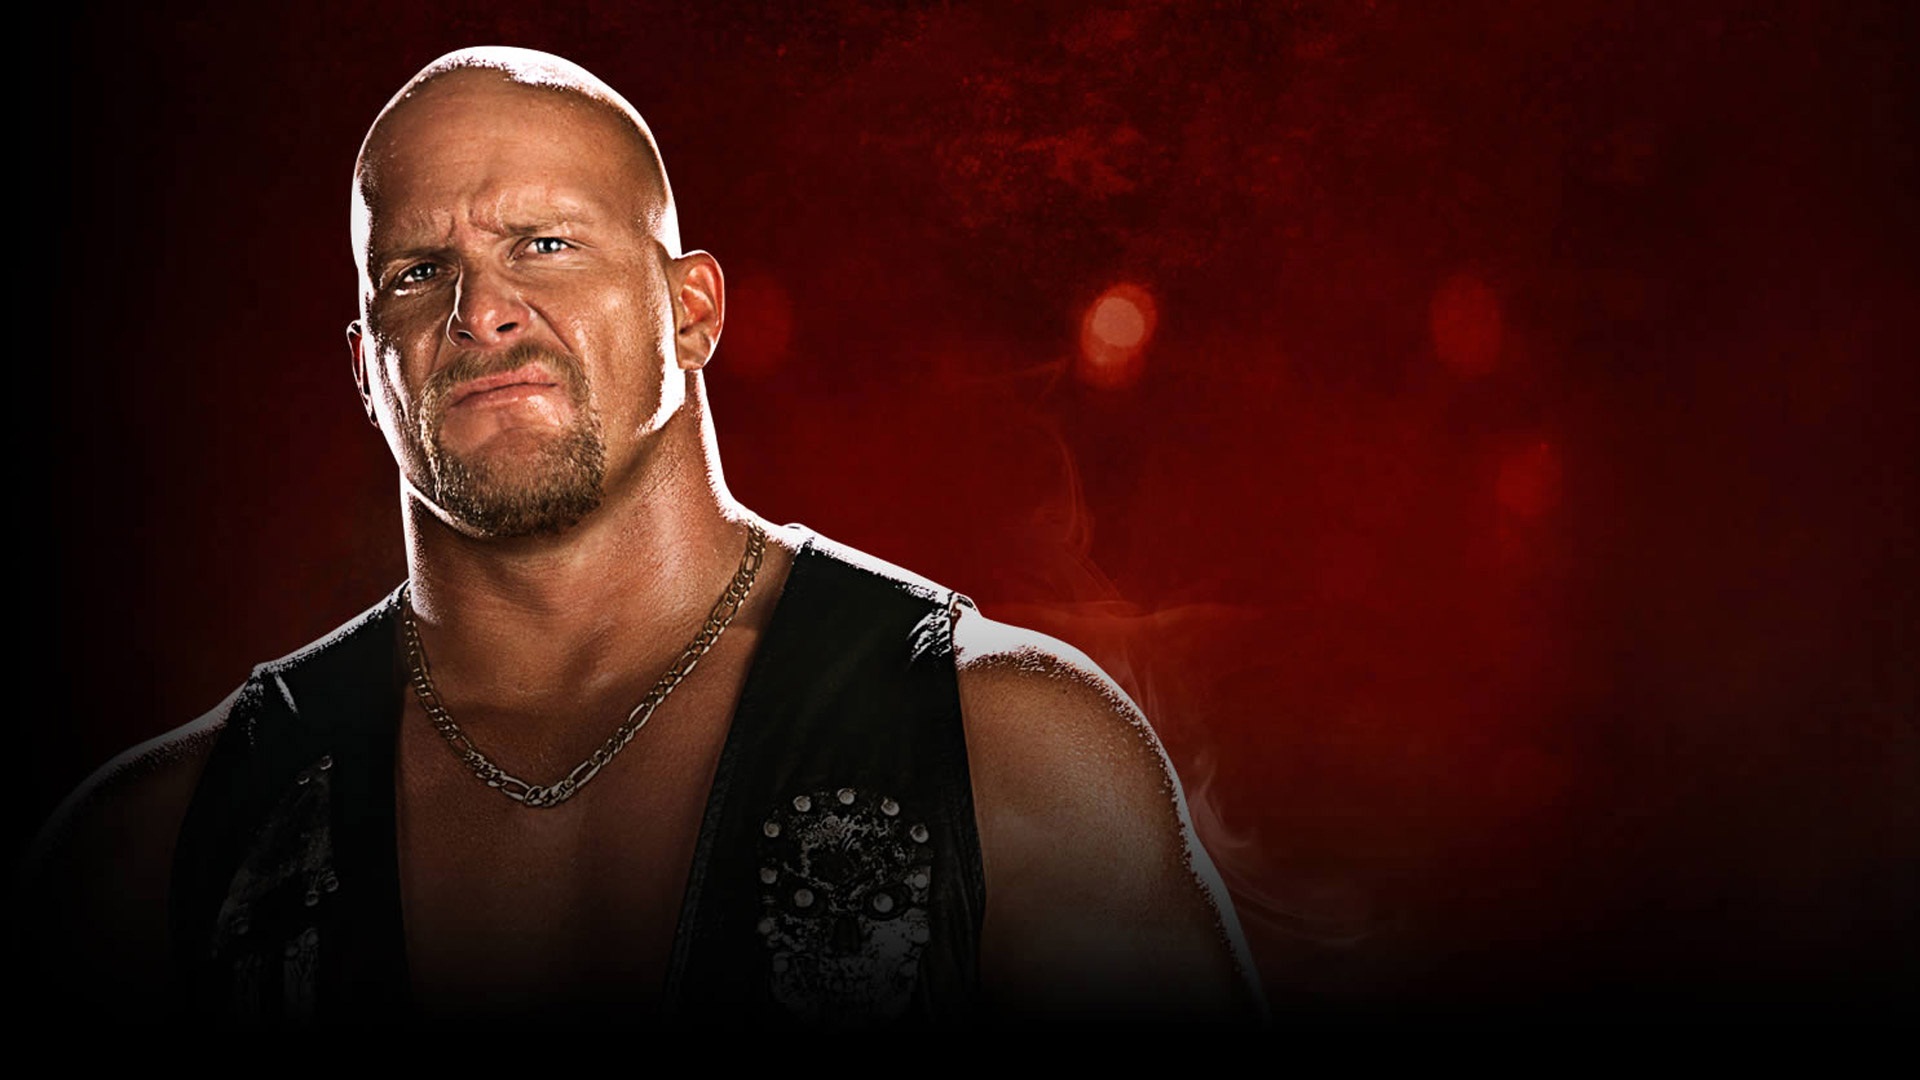 Stone Cold High Definition Wallpaper 